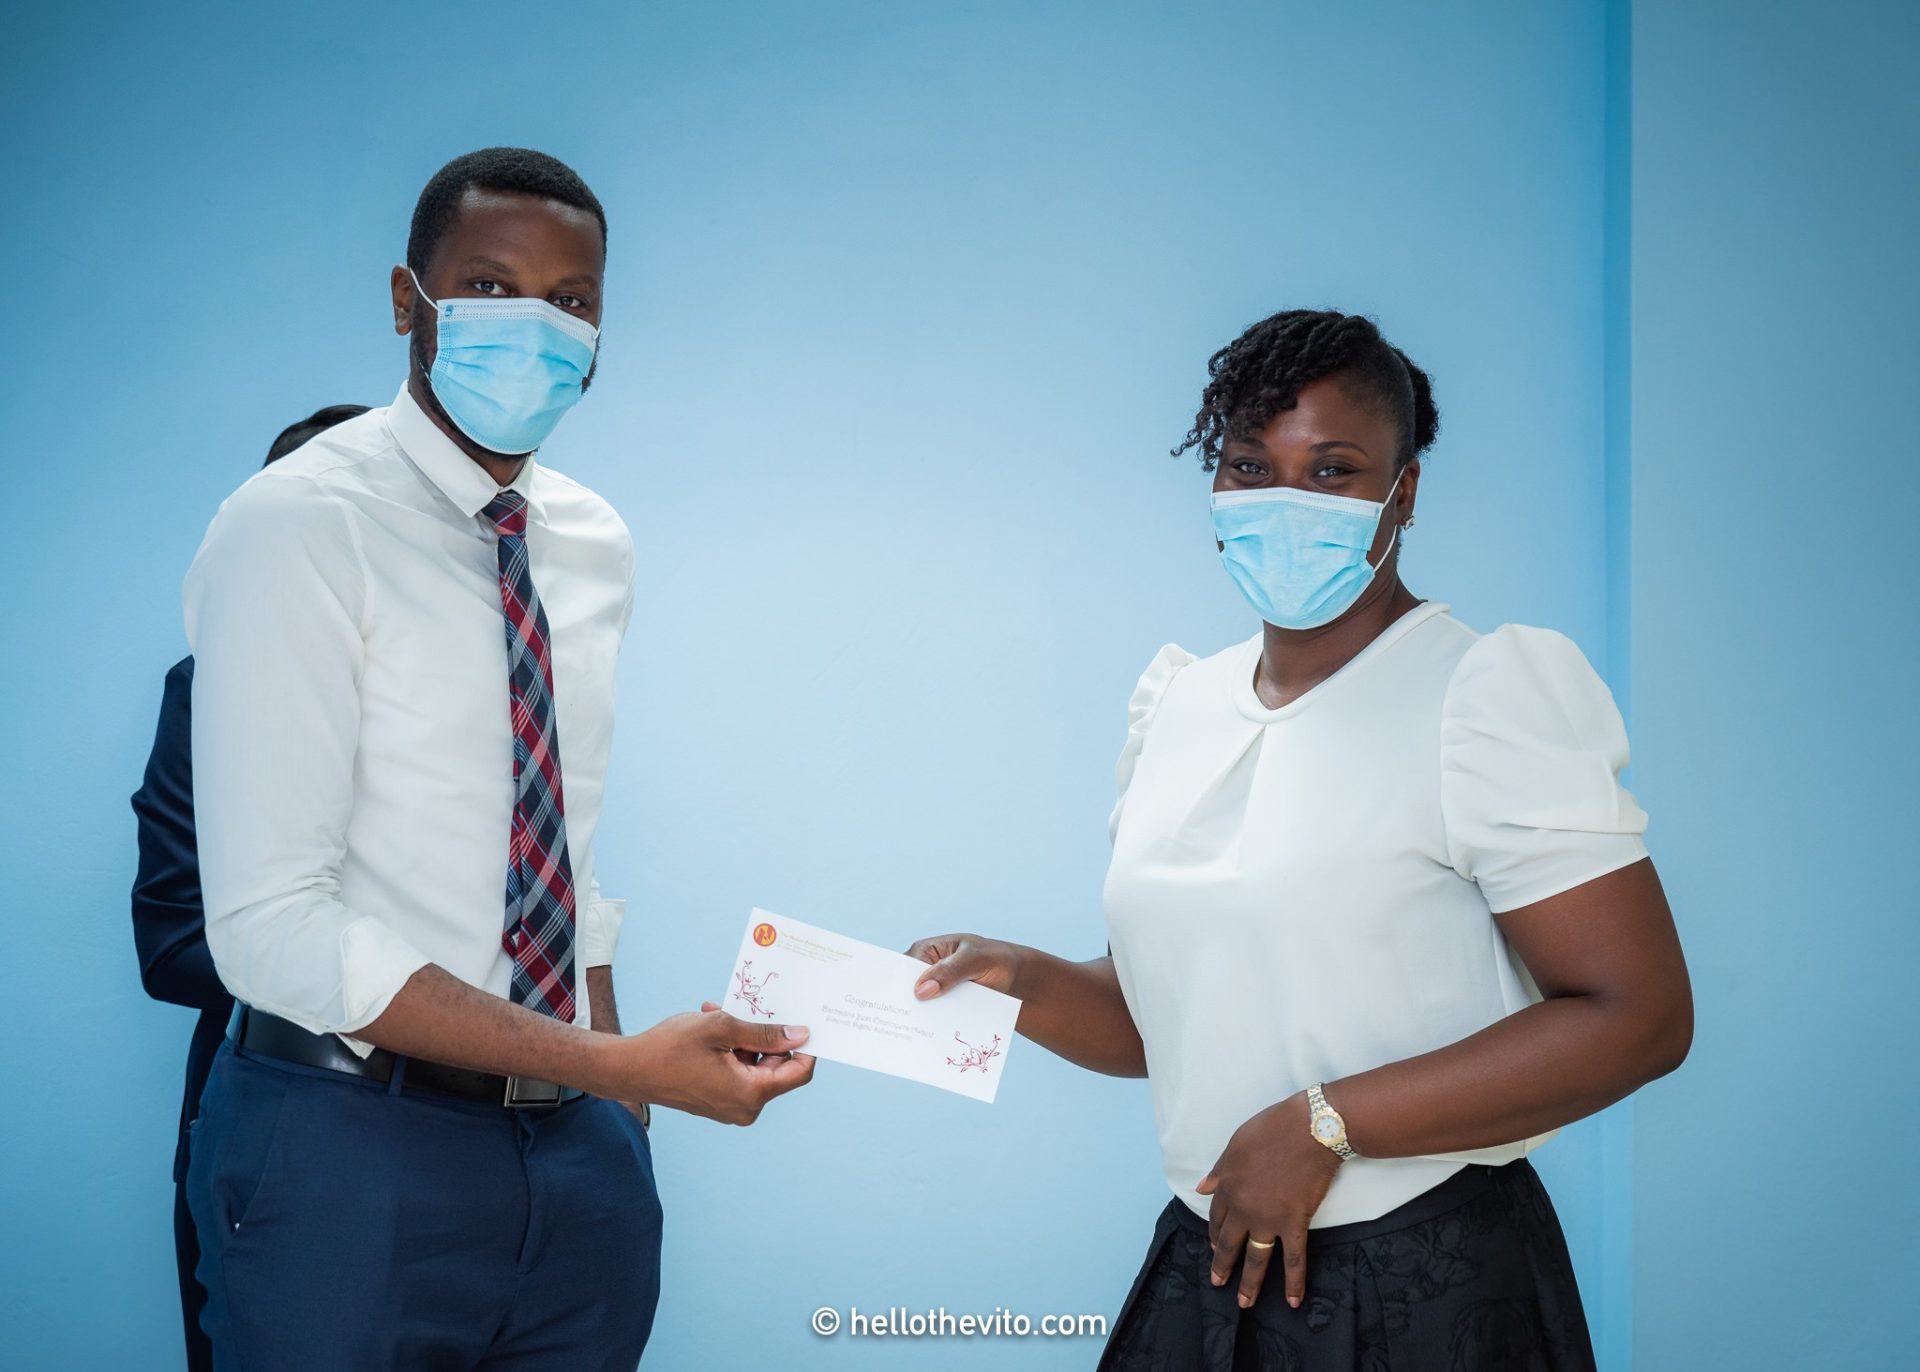 Romaine Lovell, Marketing Executive at Nation Group presenting six months subscription to the Business Authority to Simone Forde.